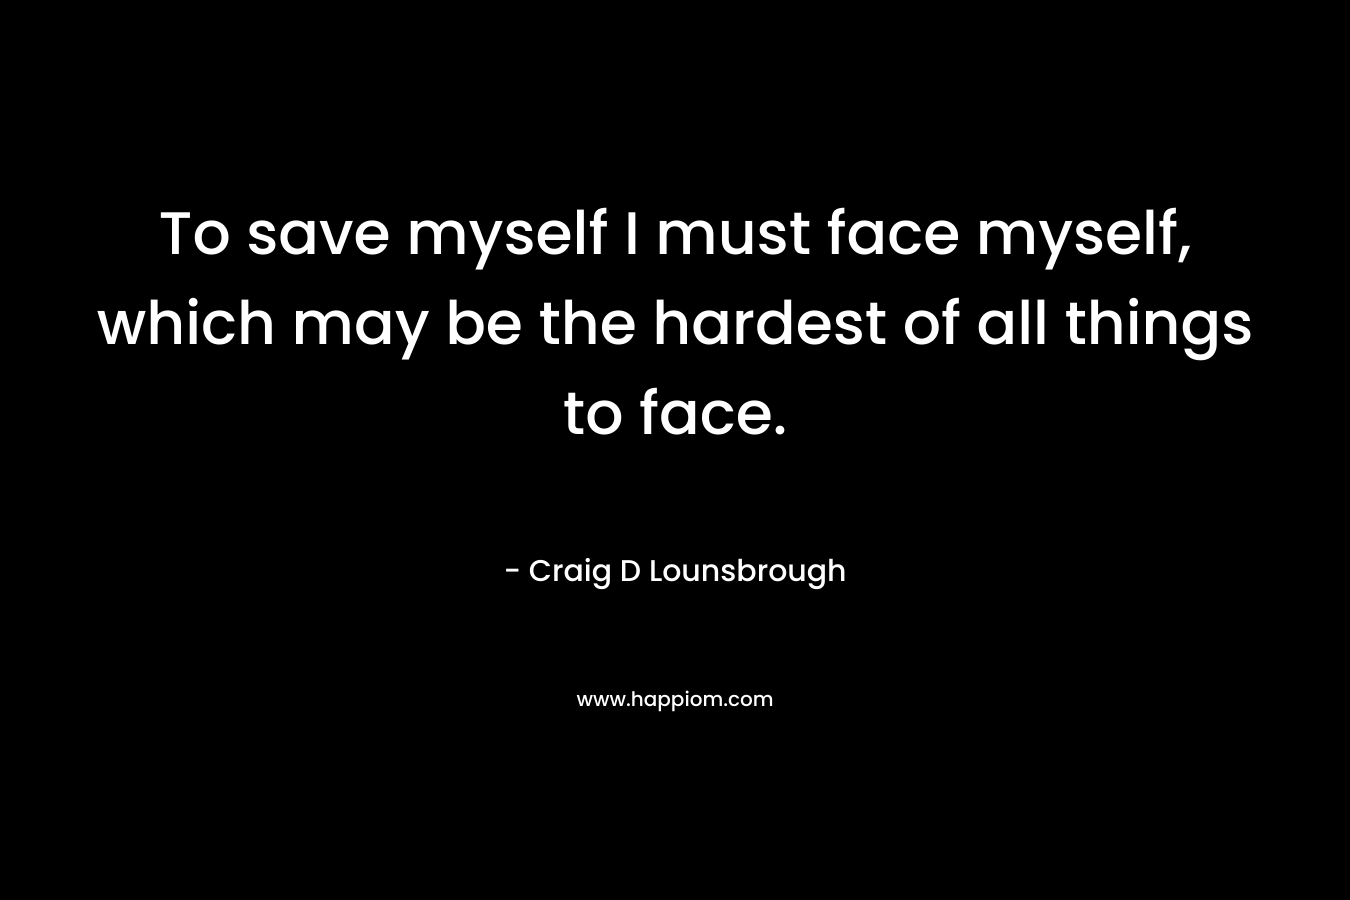 To save myself I must face myself, which may be the hardest of all things to face.